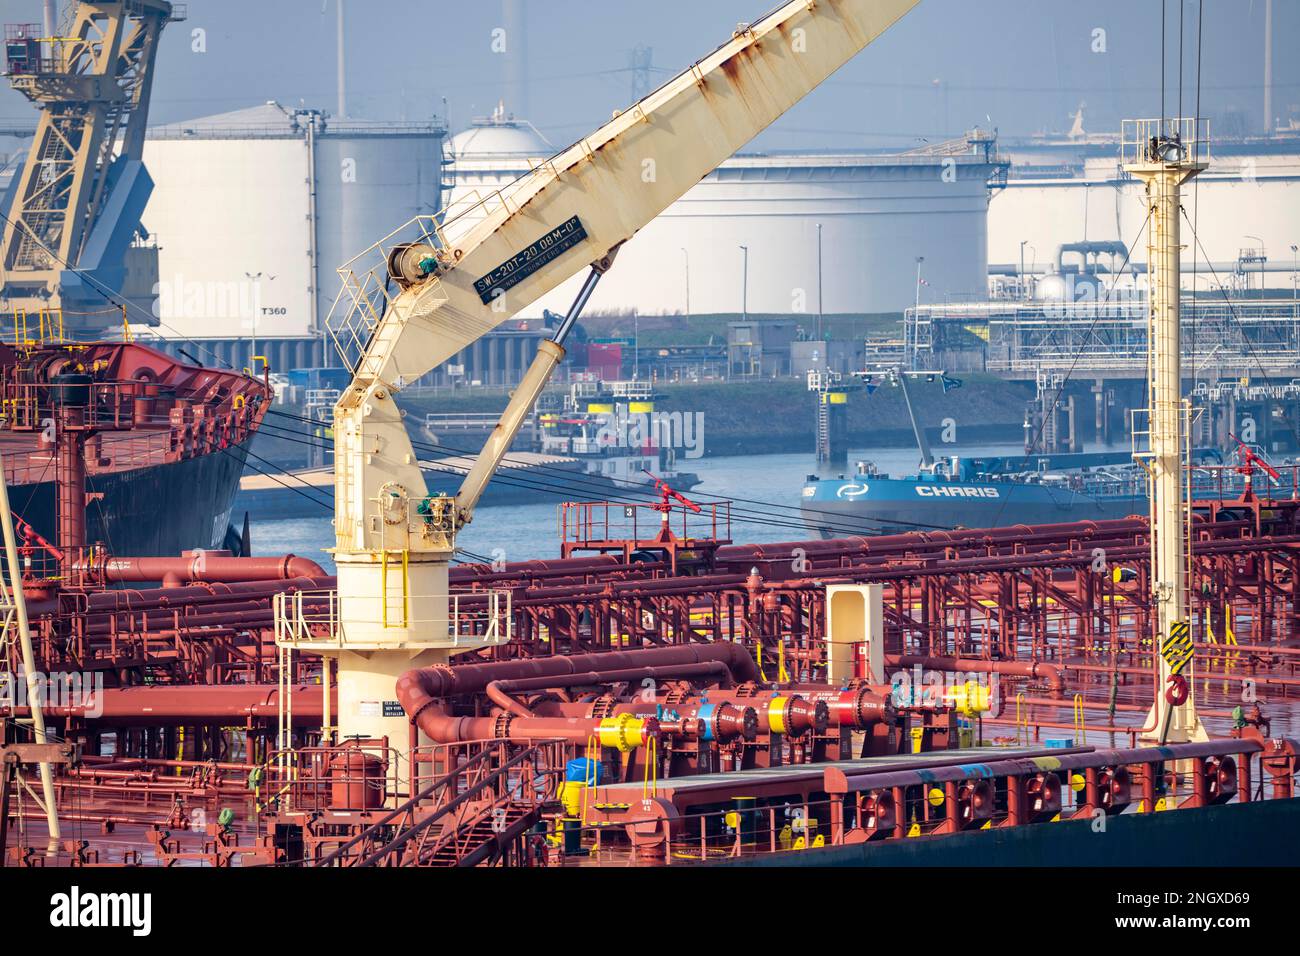 The crude oil tanker HOJO, in the seaport of Rotterdam, in the Petroleumhaven, Europoort, deck structures, pipelines, Rotterdam, Netherlands, Stock Photo